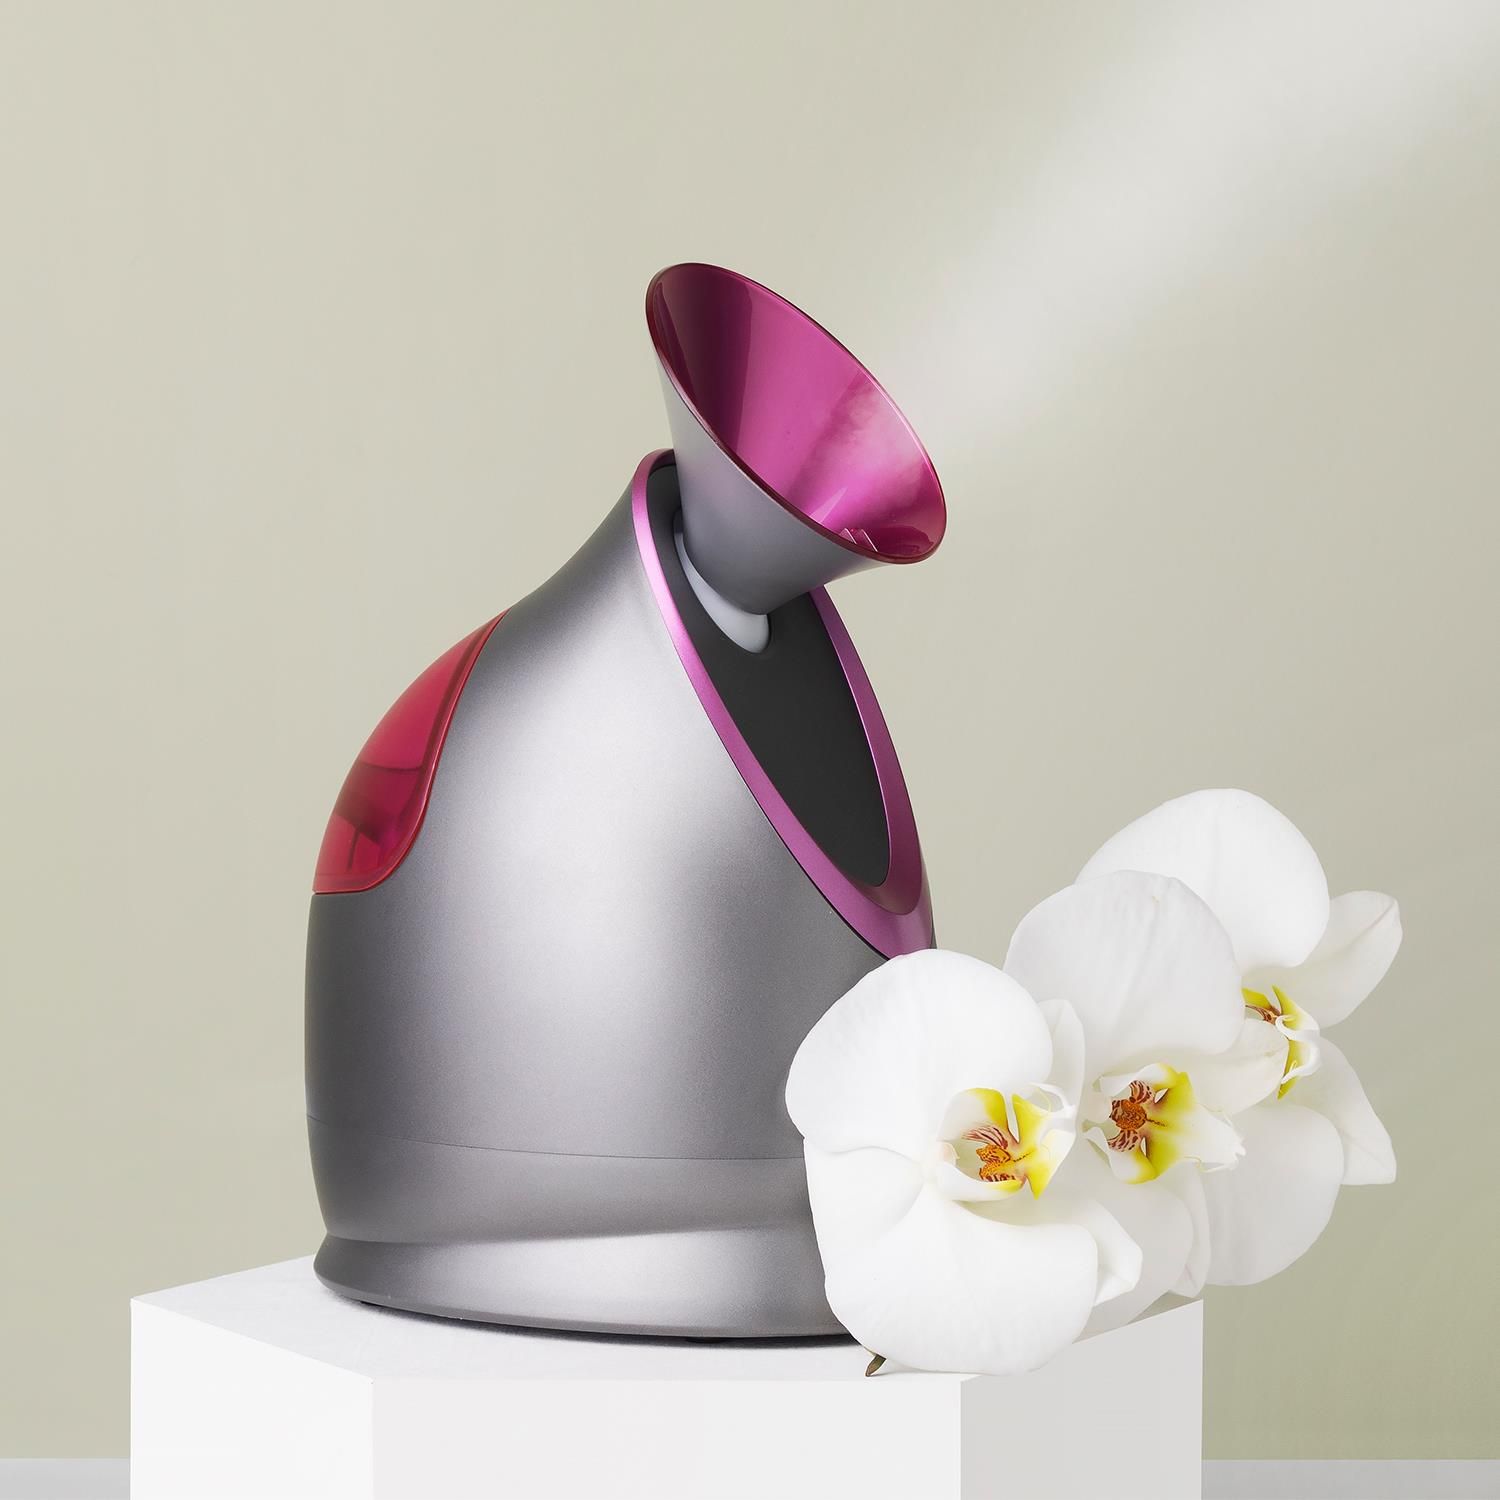 Recreate the salon facial experience at home with the envie facial steamer.  Featuring nano-ionic steam which when combined with ionic water particles is 10x more effective in penetrating skin than basic hot water steamers, use with distilled or purified water for best results.

For the ultimate in self-care, use a few drops of your favourite essential oil onto the aromatherapy cotton pads and place them on the machine’s built-in aromatherapy tablets.  All that’s left to do is sit back and relax for approximately 10 minutes.

Key Features:
Moisturises skin and unclogs pores to allow for better penetration 
Adjustable nozzle